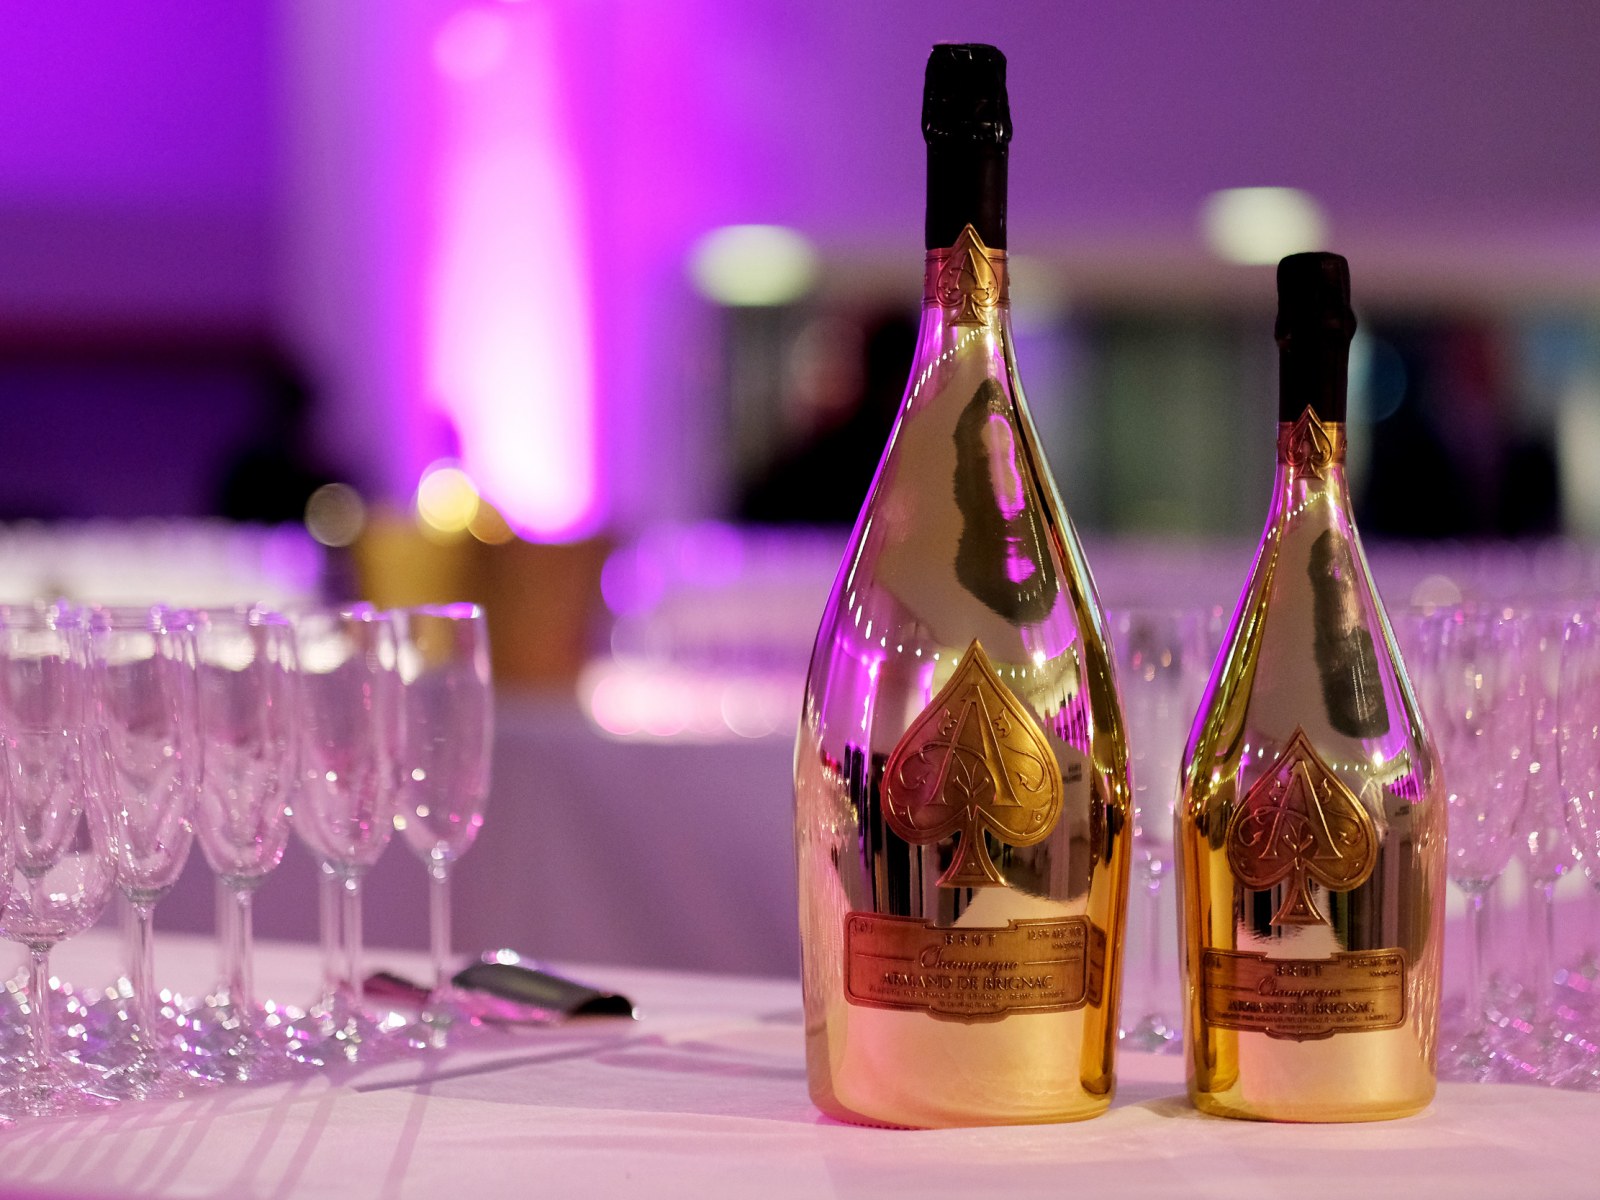 Beyonce and Jay Z's Golden Globes Champagne: Armand de Brignac Ace